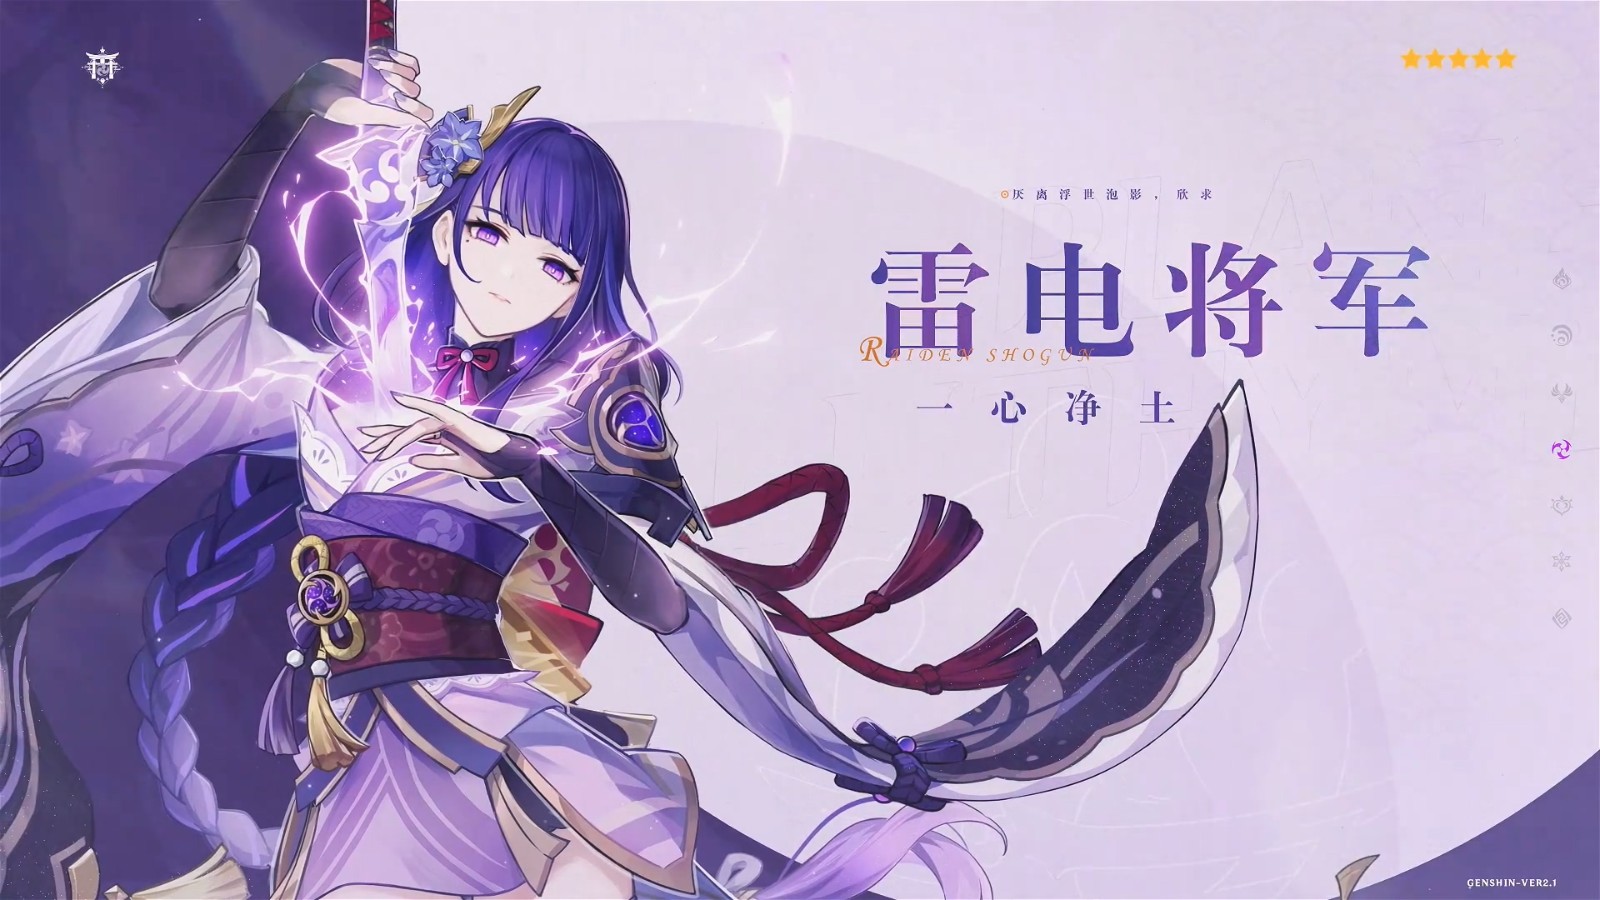  Original God 2.1 version PV was officially launched on September 1